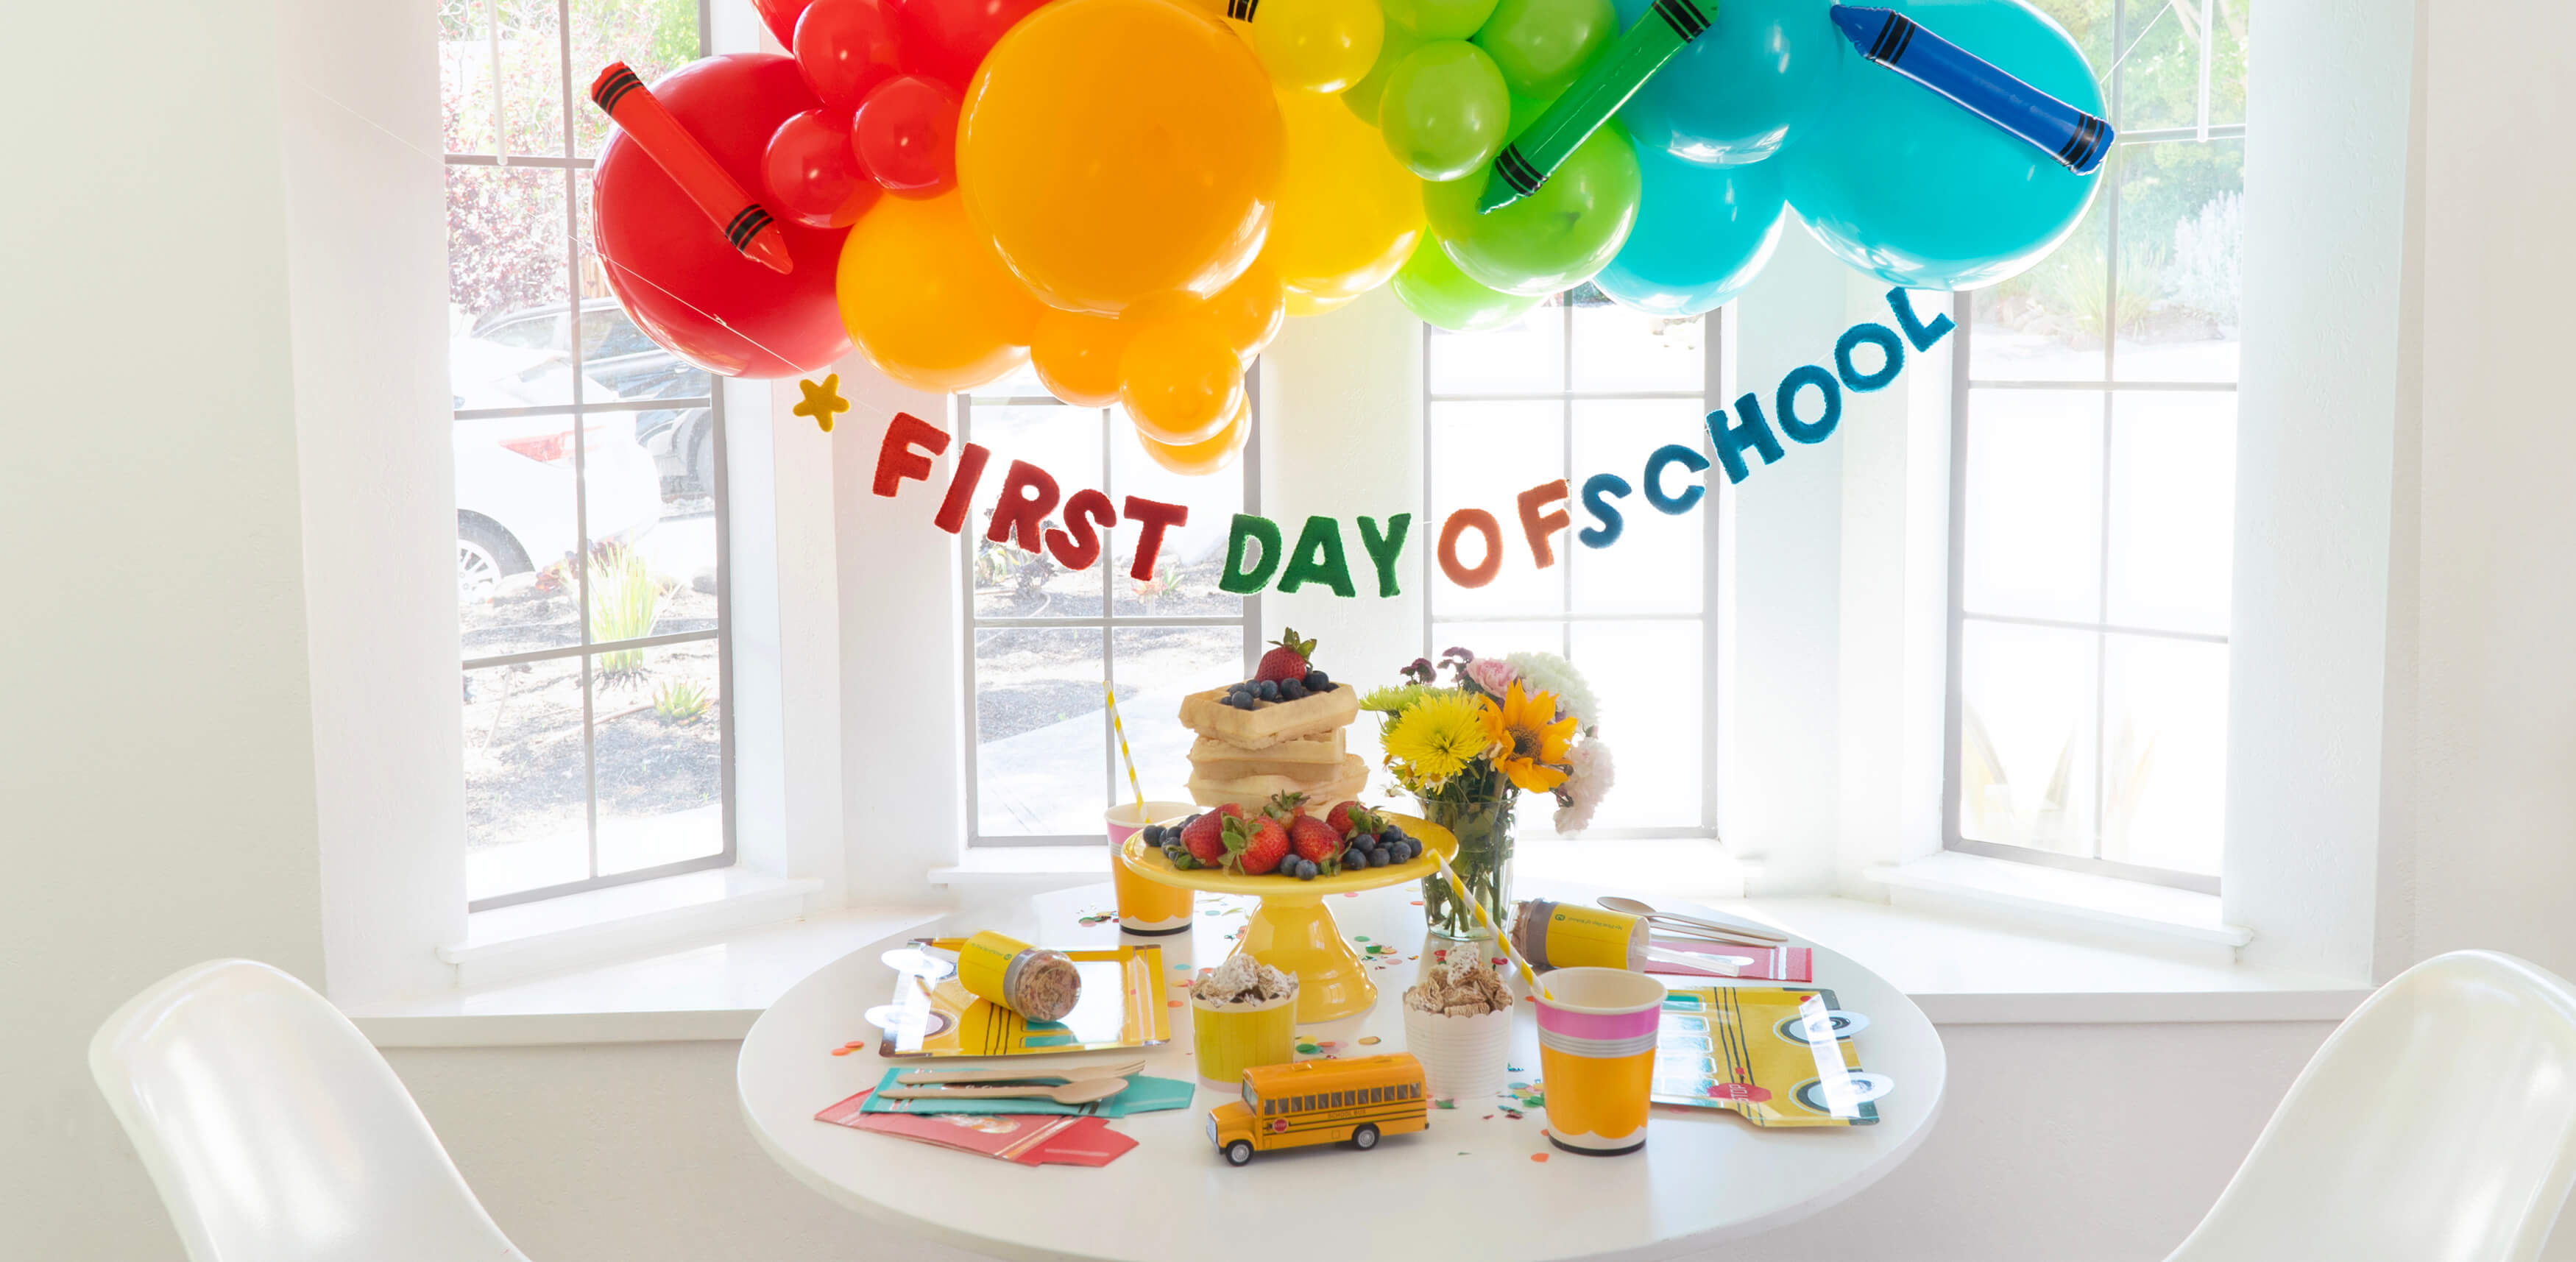 Kid's First Day of School Celebration Ideas by Momo Party